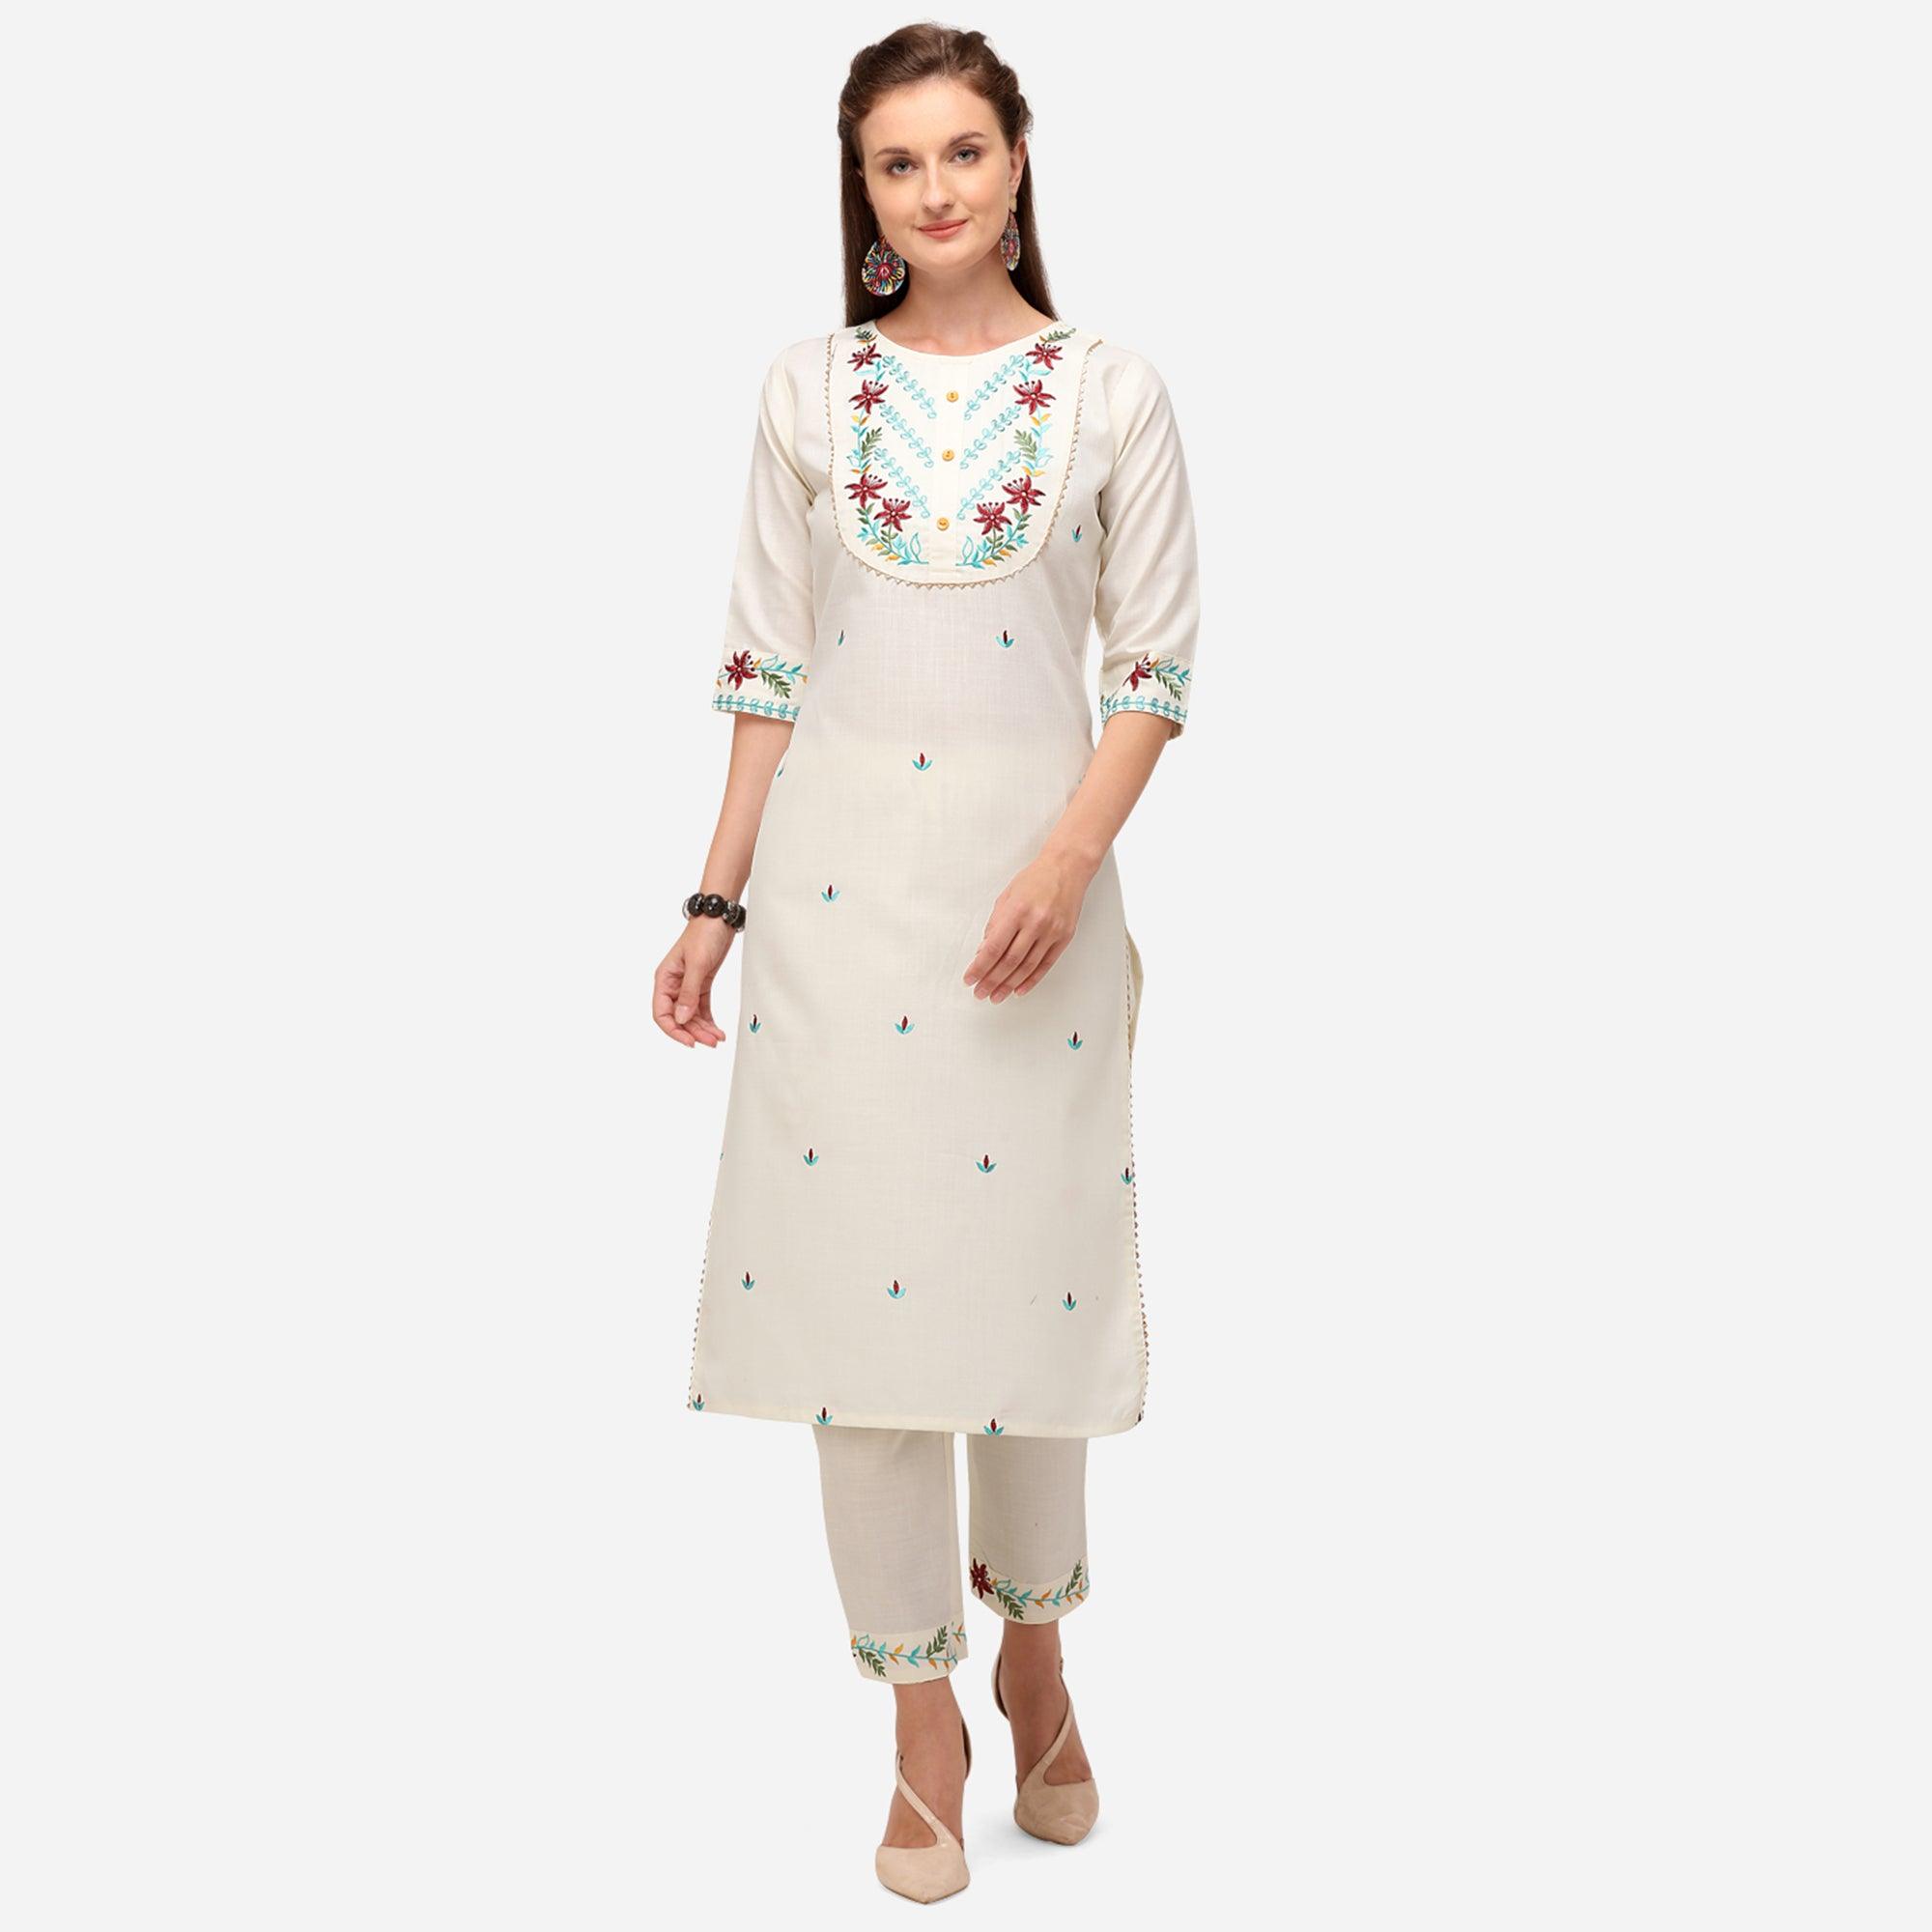 White Casual Wear Floral Embroidered Cotton Kurti Pant Set - Peachmode